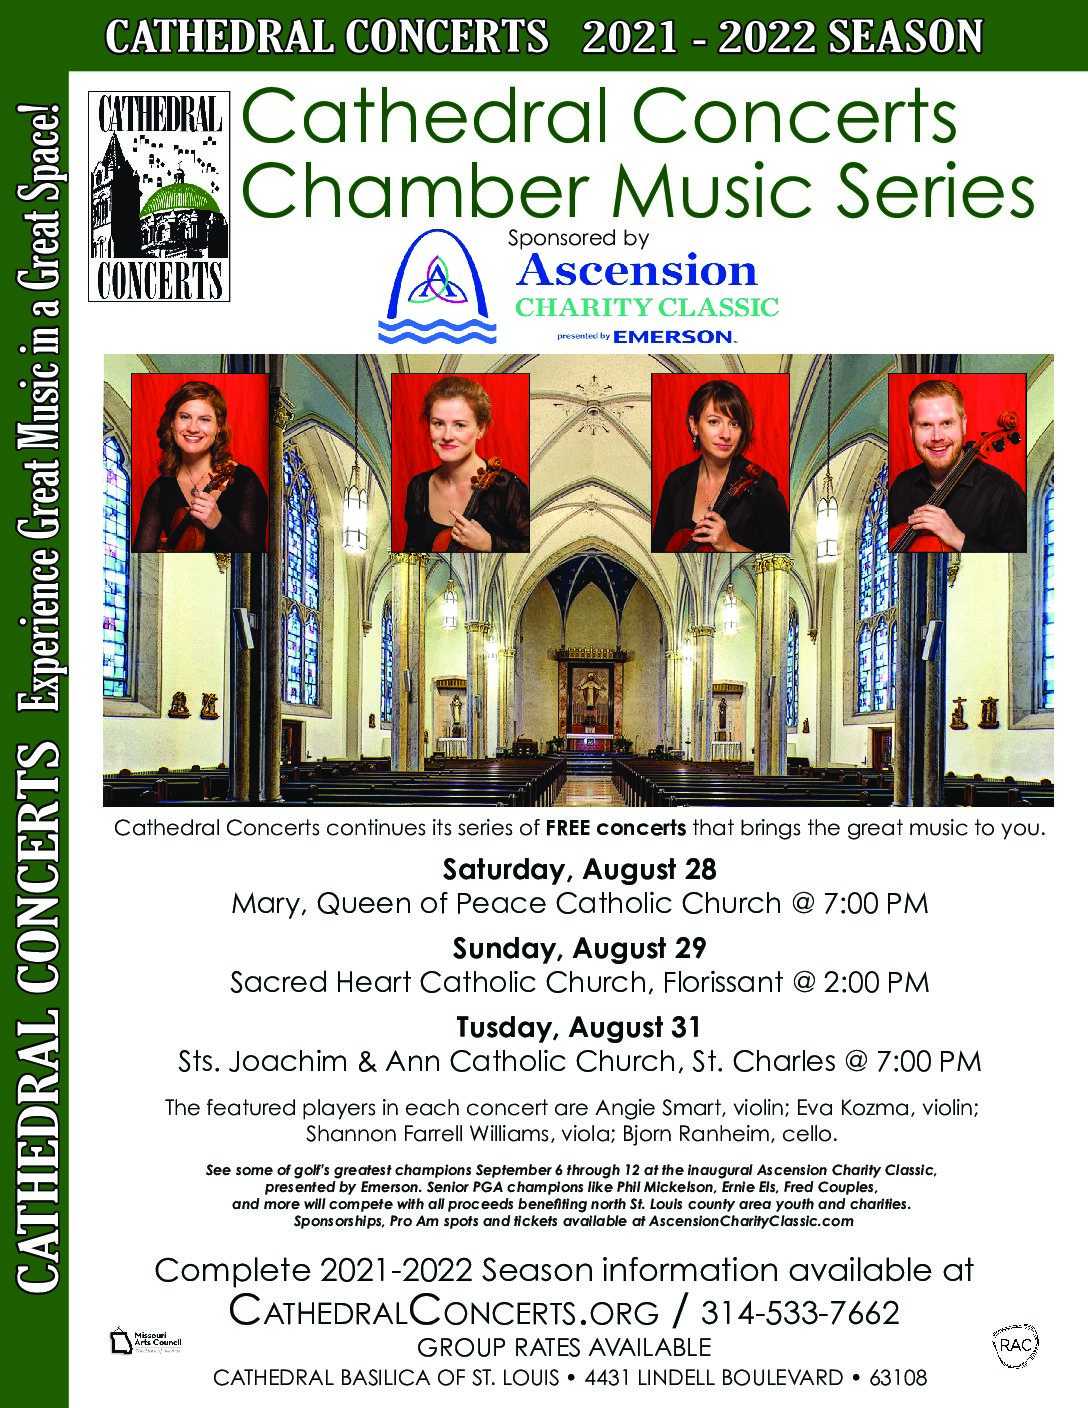 St. Louis Cathedral Concerts Great Music in St. Louis